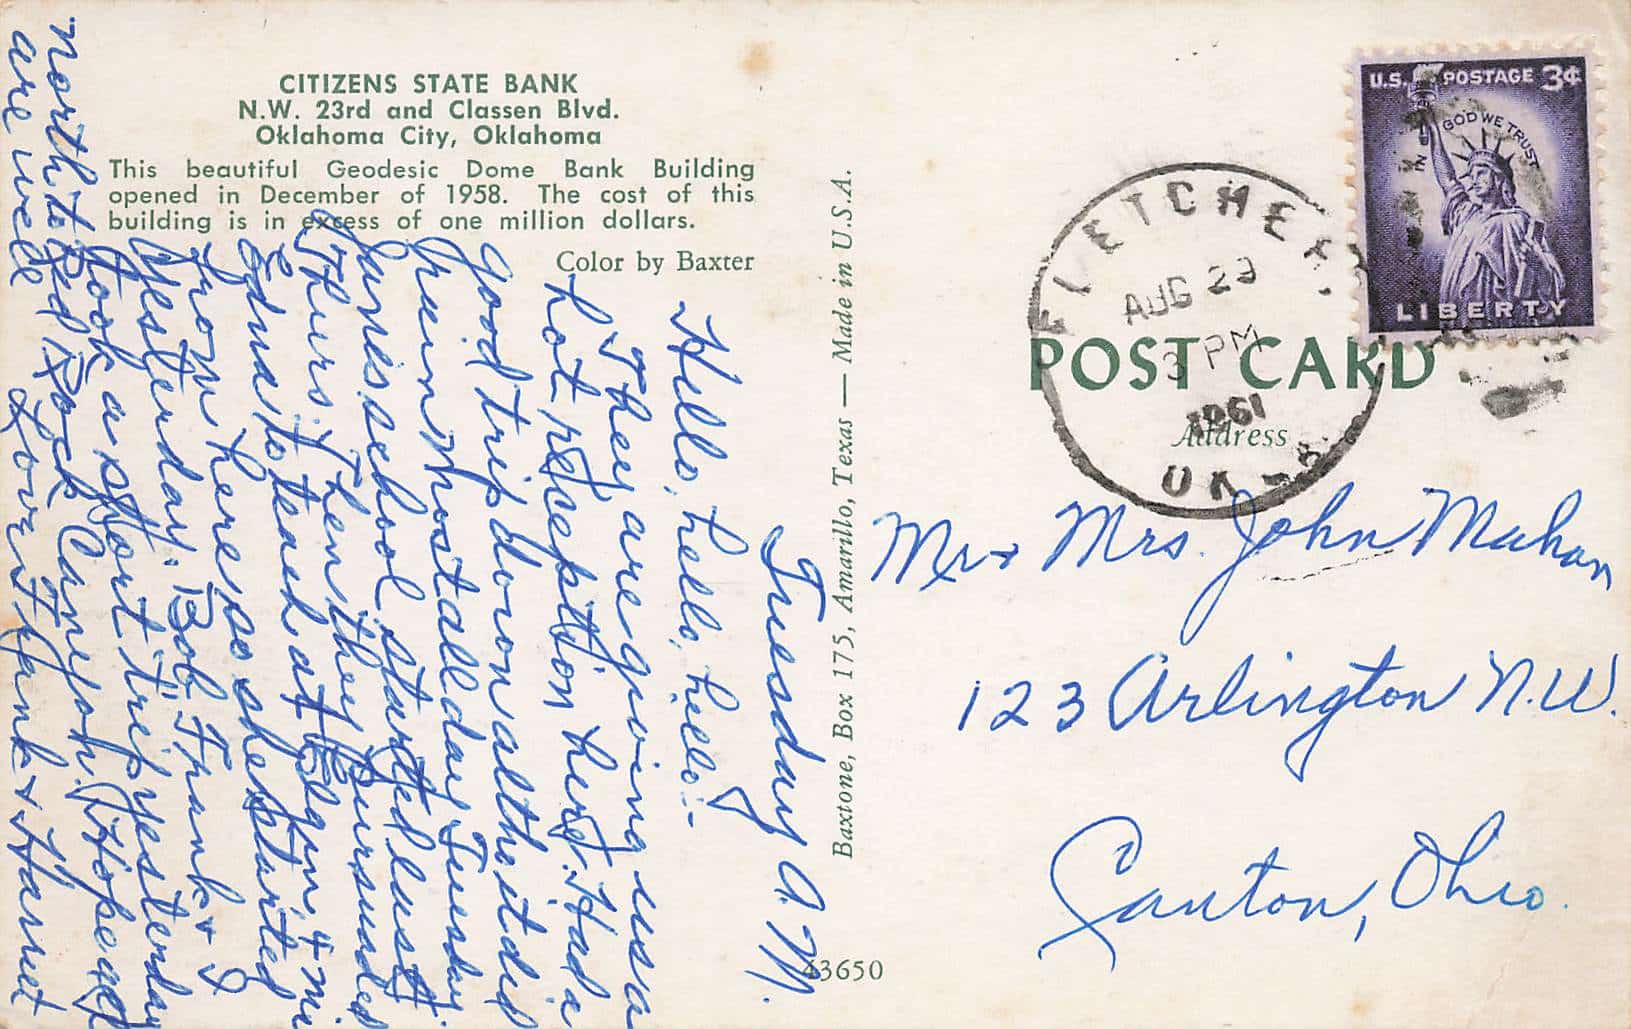 A postcard with a handwritten note on it.